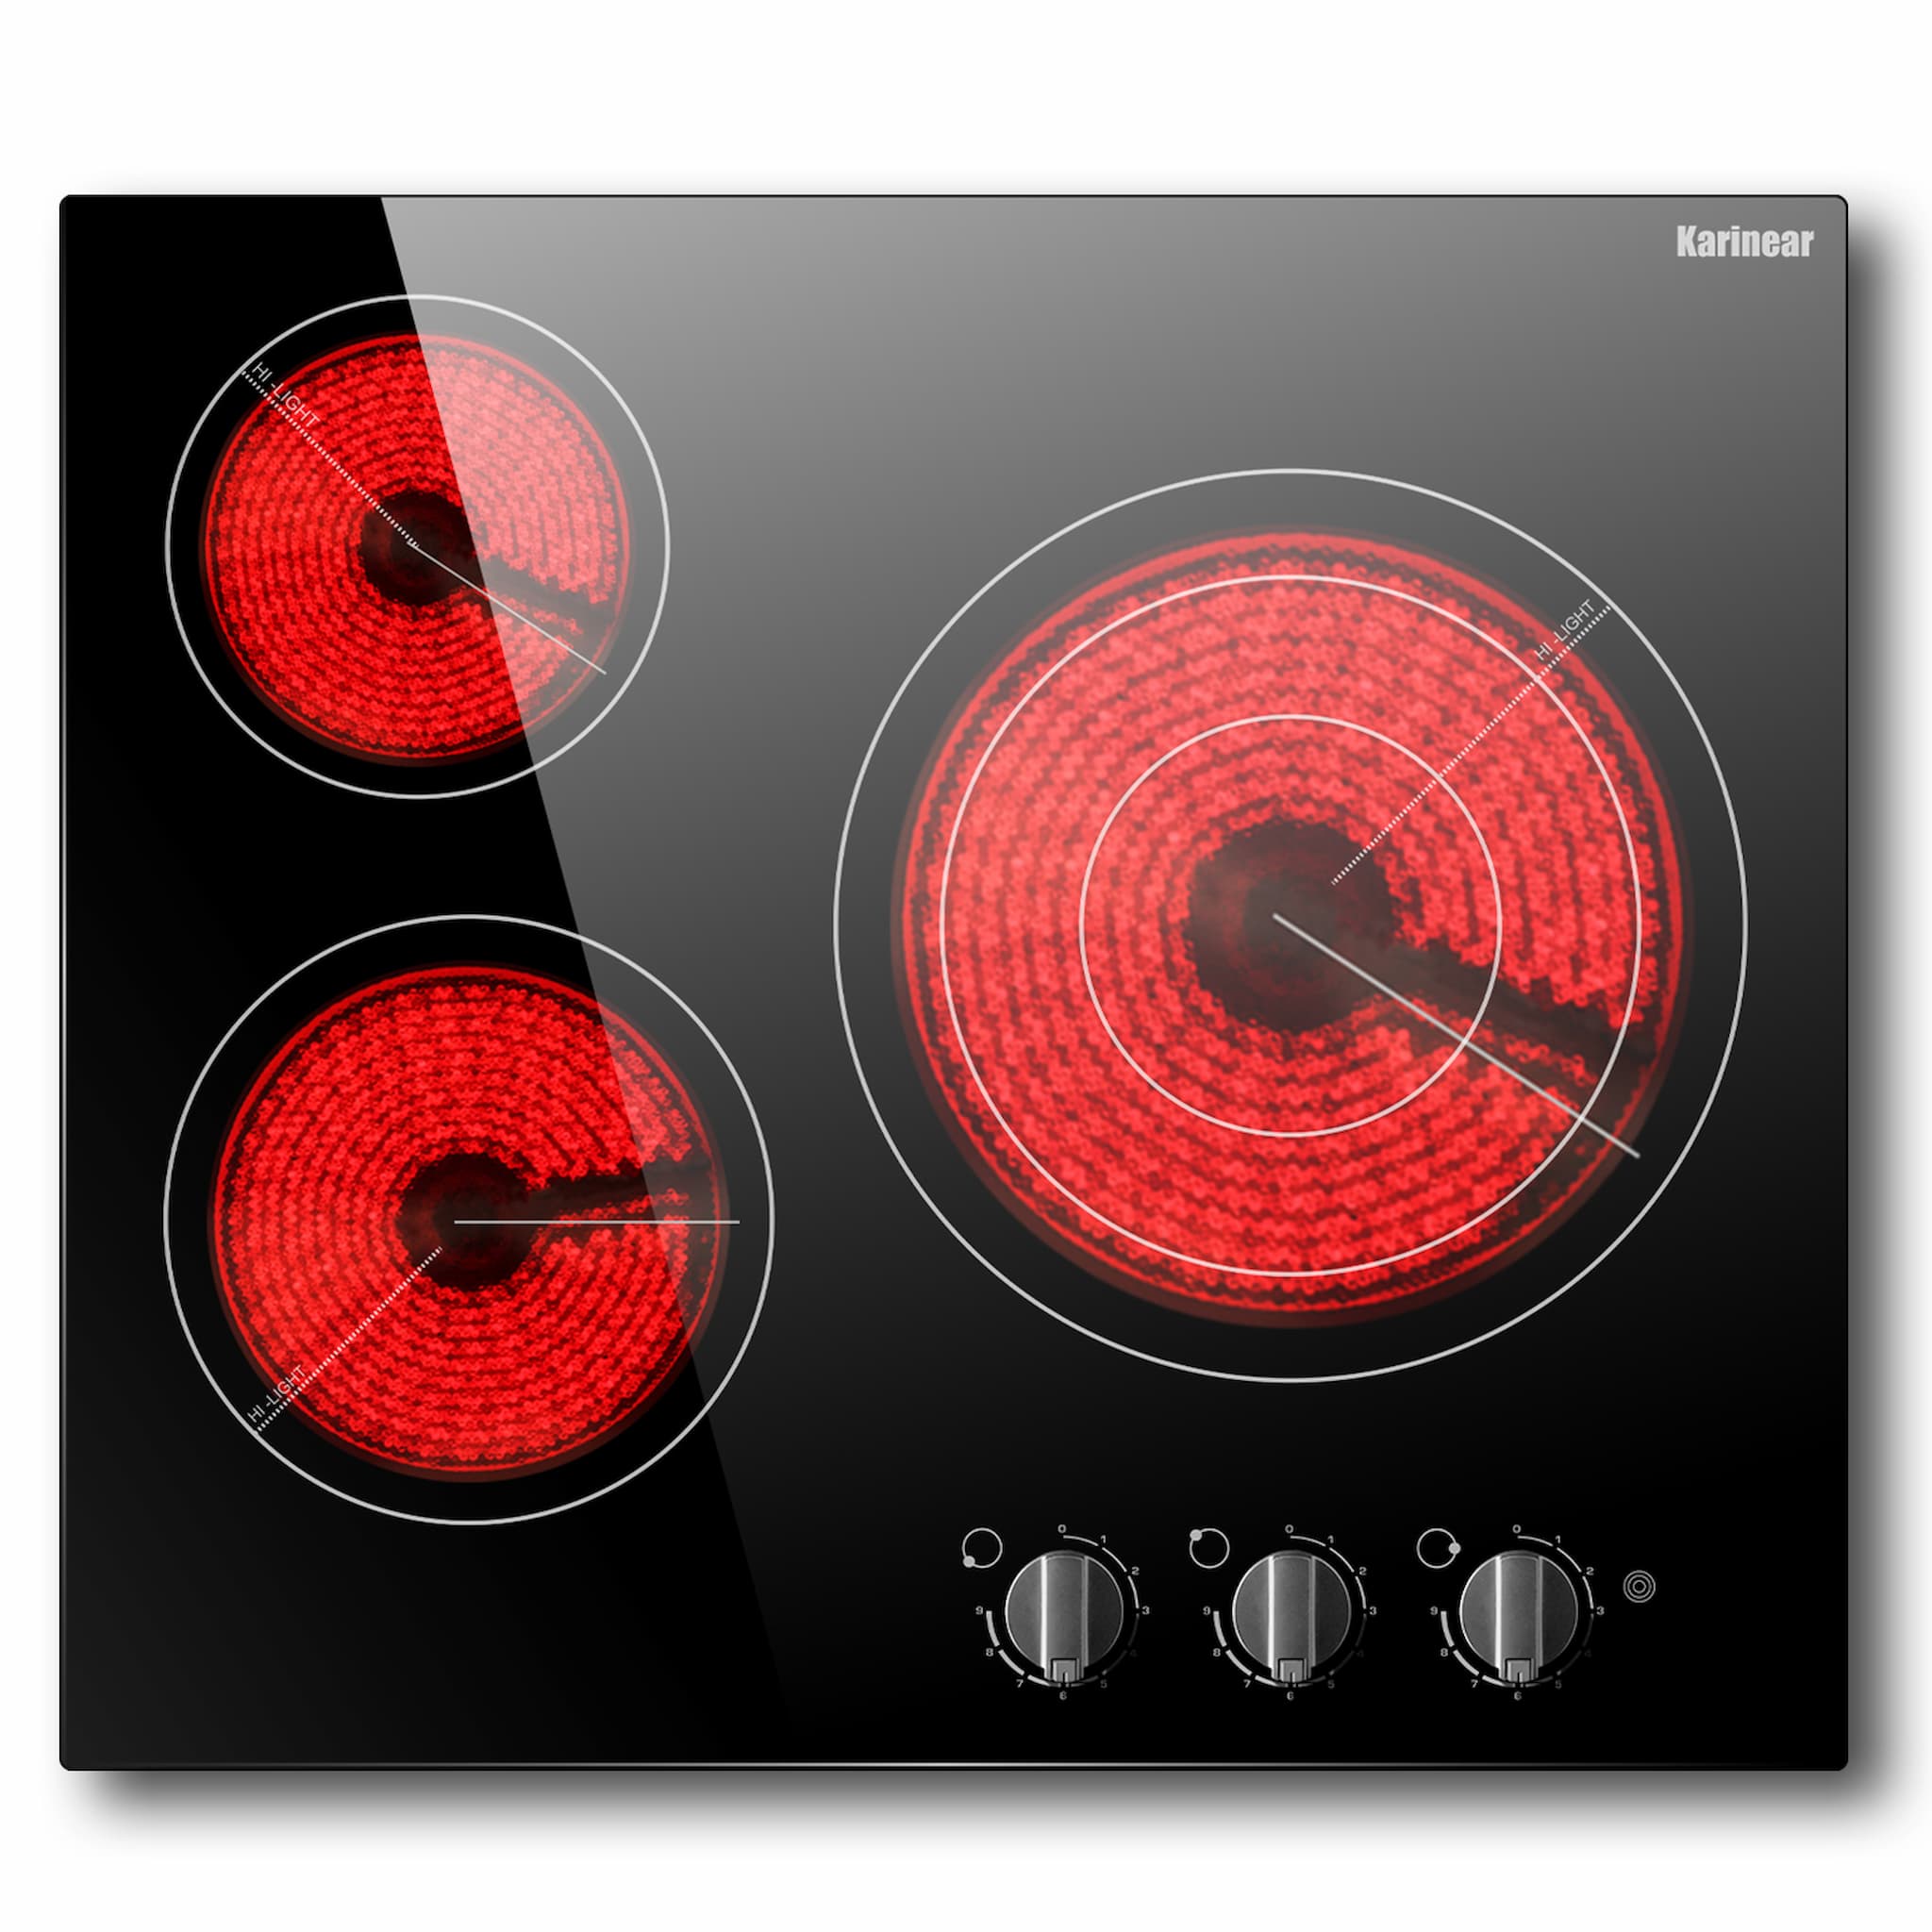 Karinear 24'' Electric Cooktop 3 Burners Ceramic Cooktop, Built-in Electric Stove Top Knob Control, Hot Warning, Over-Temperature Protection, 9 Power Setting, 220-240v, 5700W, Hard Wire (No Plug)